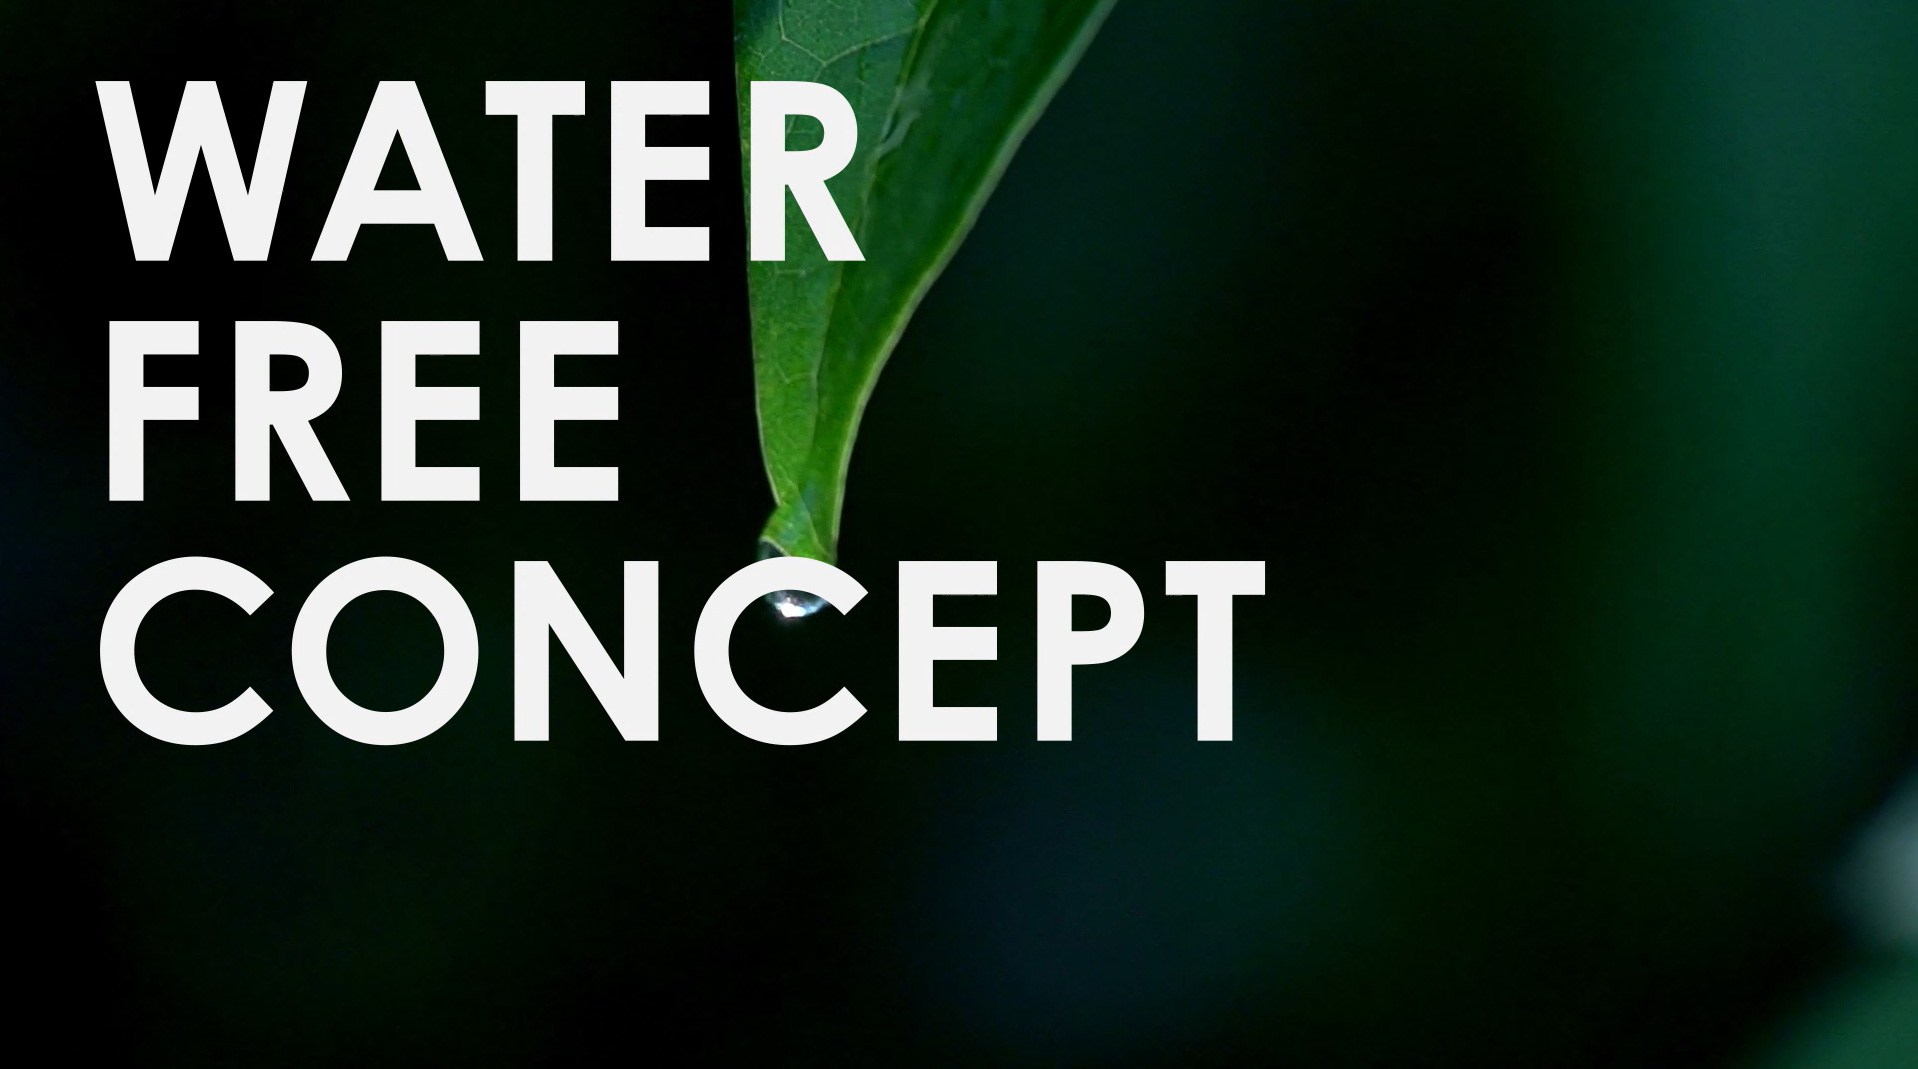 WATER FREE CONCEPT